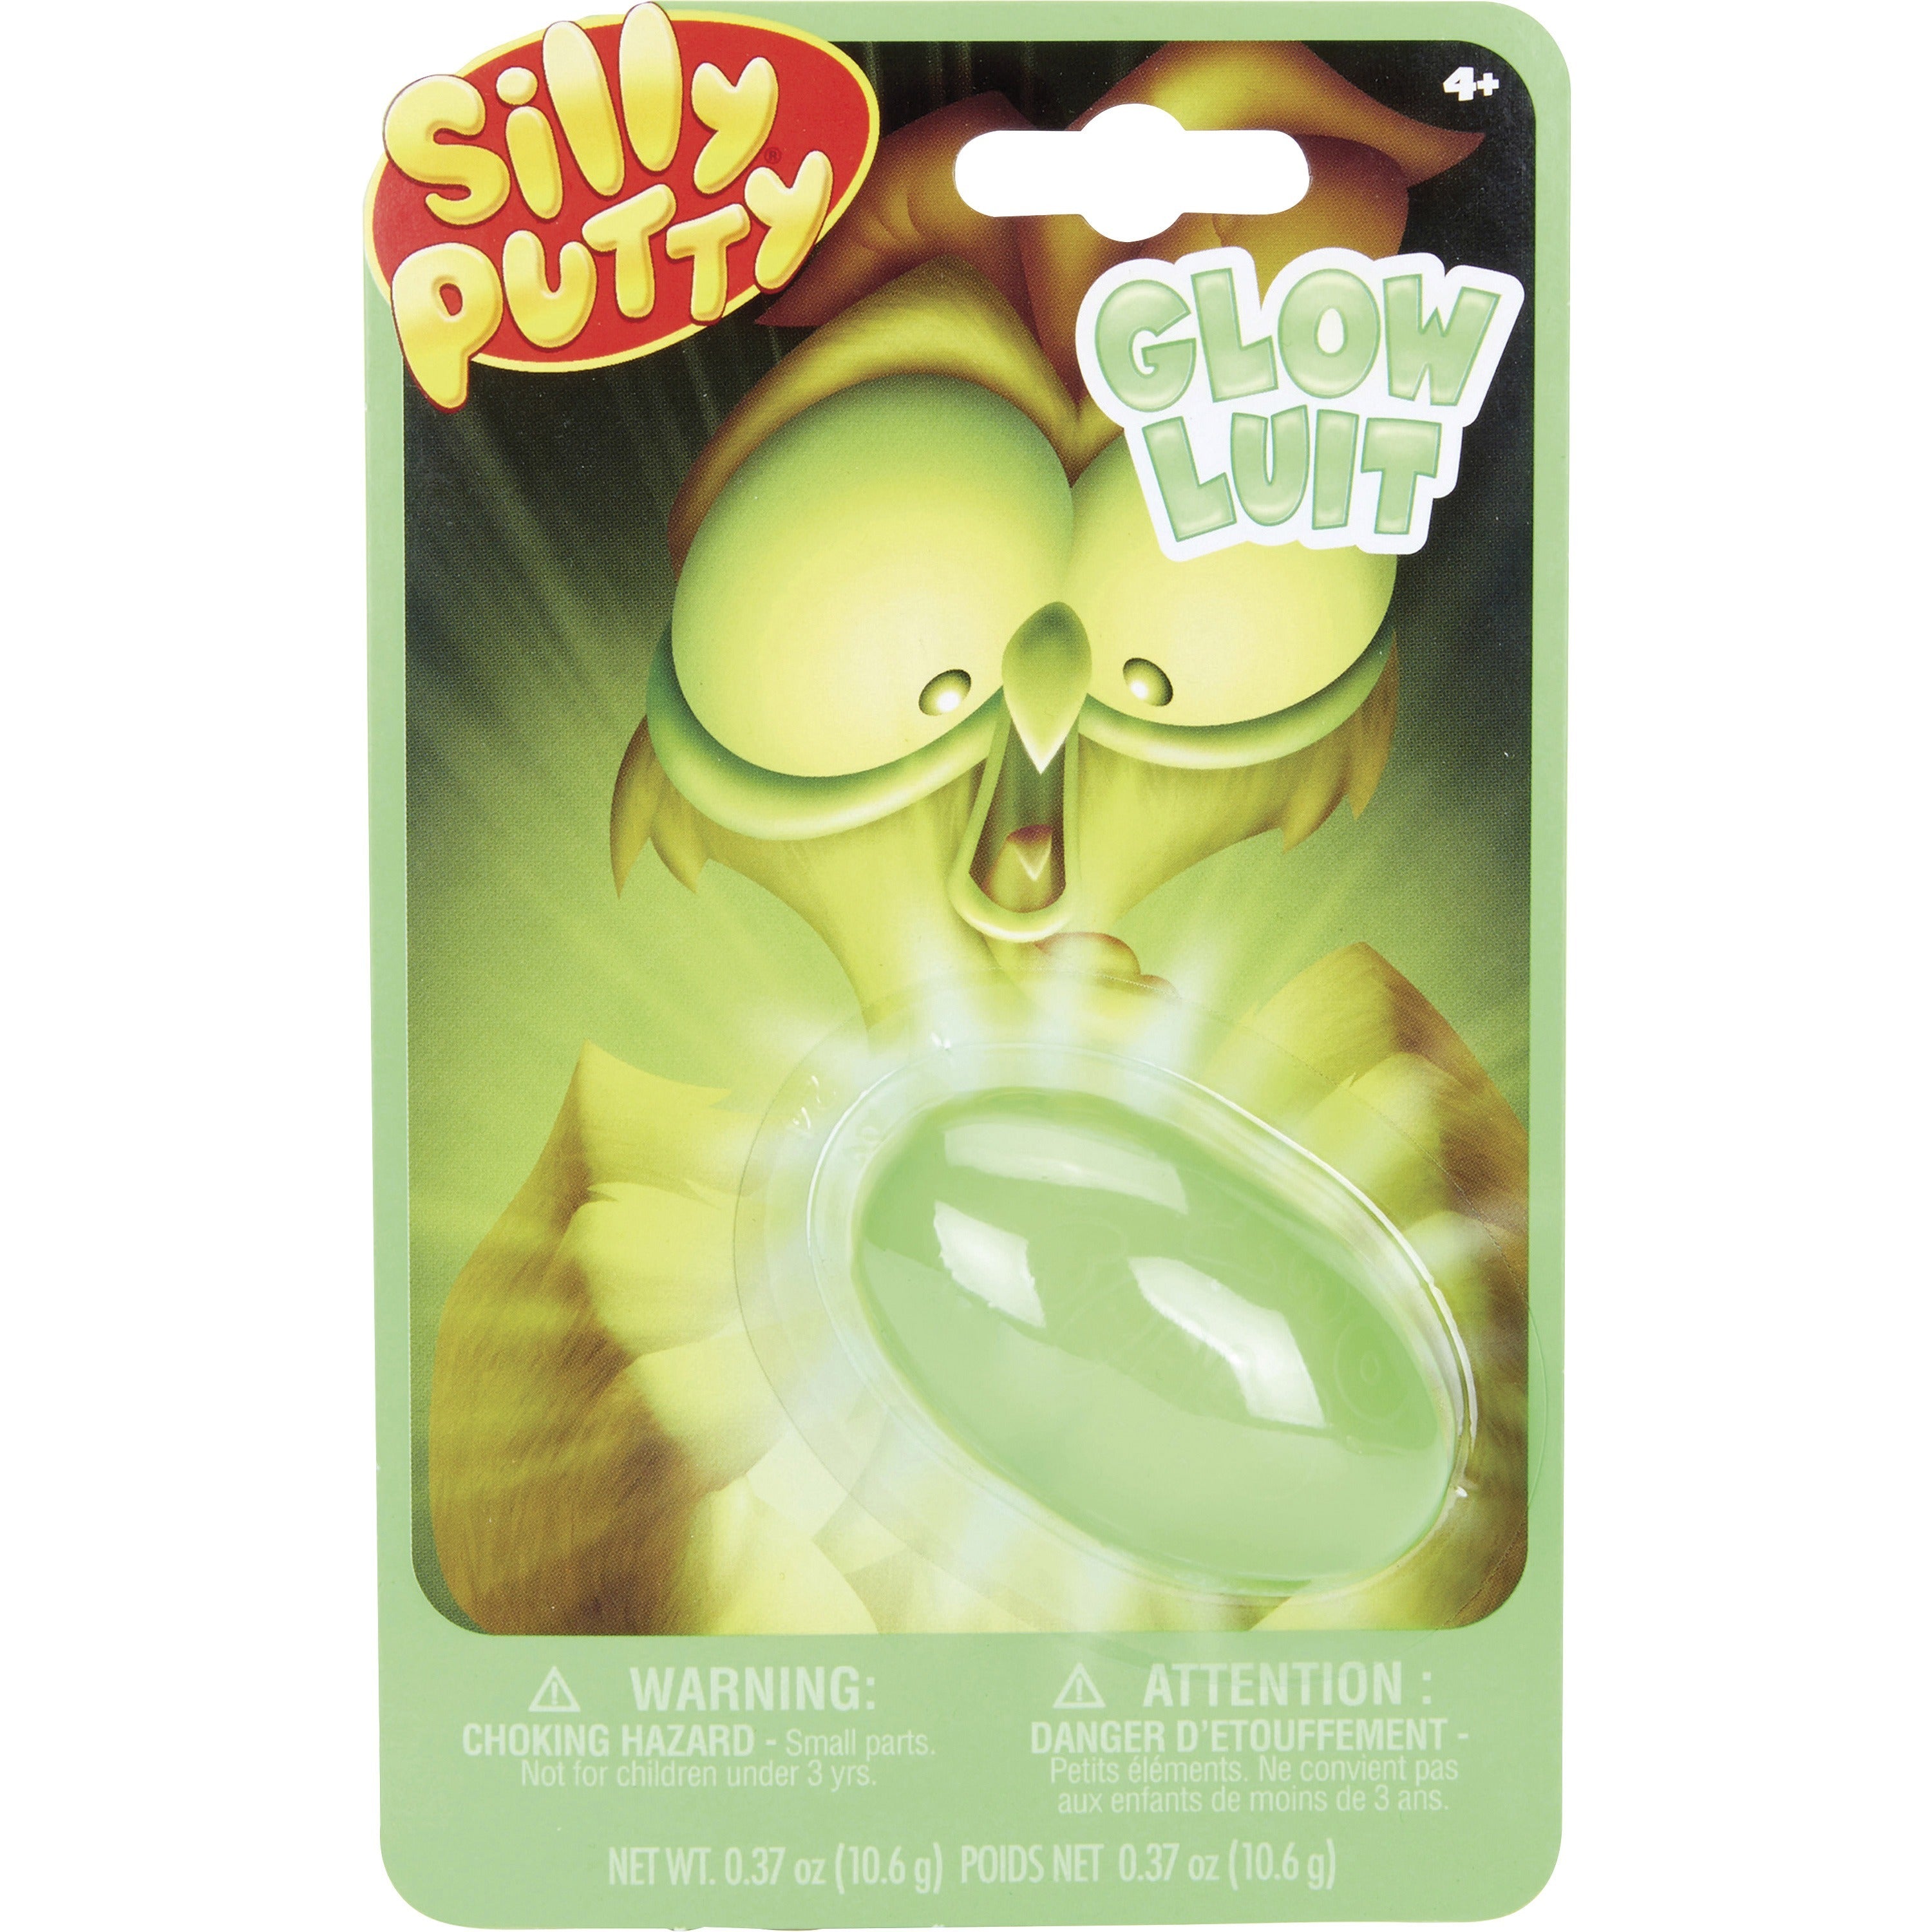 silly-putty-glow-fun-and-learning-recommended-for-4-year-8-carton-green-glow_cyo080316 - 1